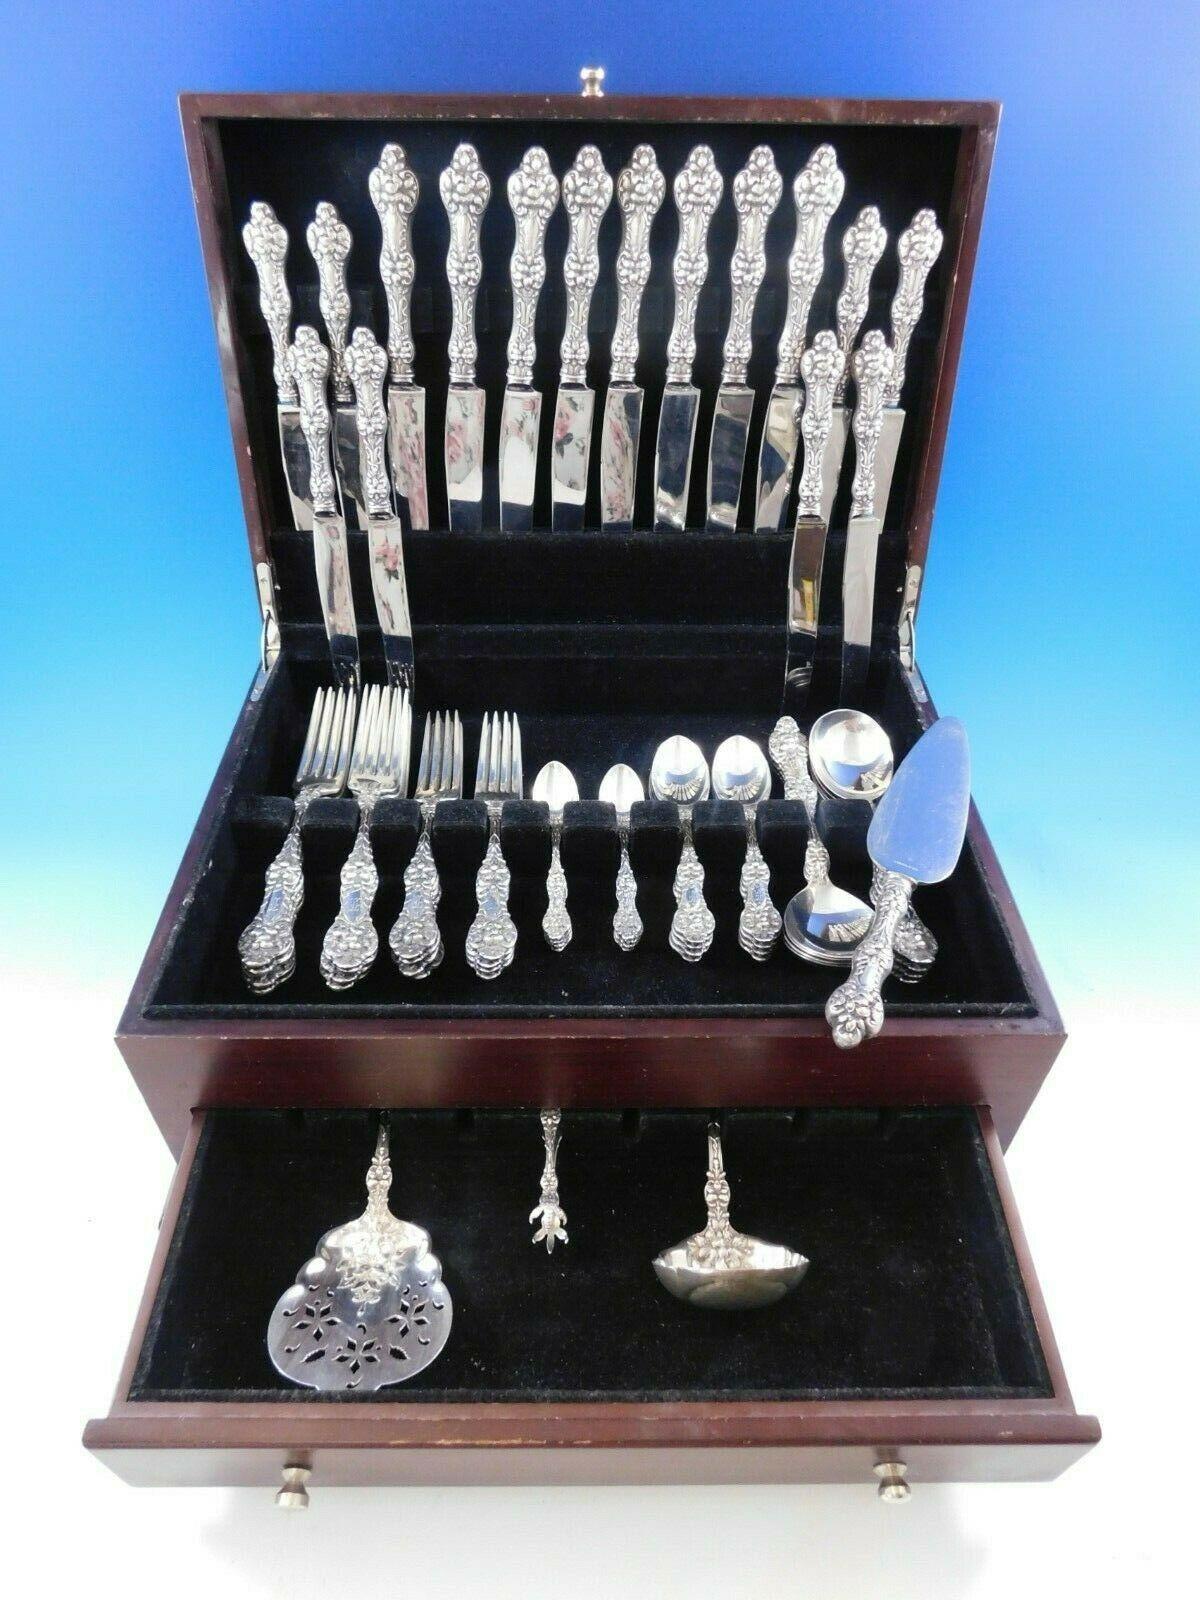 Dinner size old orange blossom by Alvin floral sterling silver Flatware set - 60 pieces. This set includes:

8 dinner size knives, 9 5/8